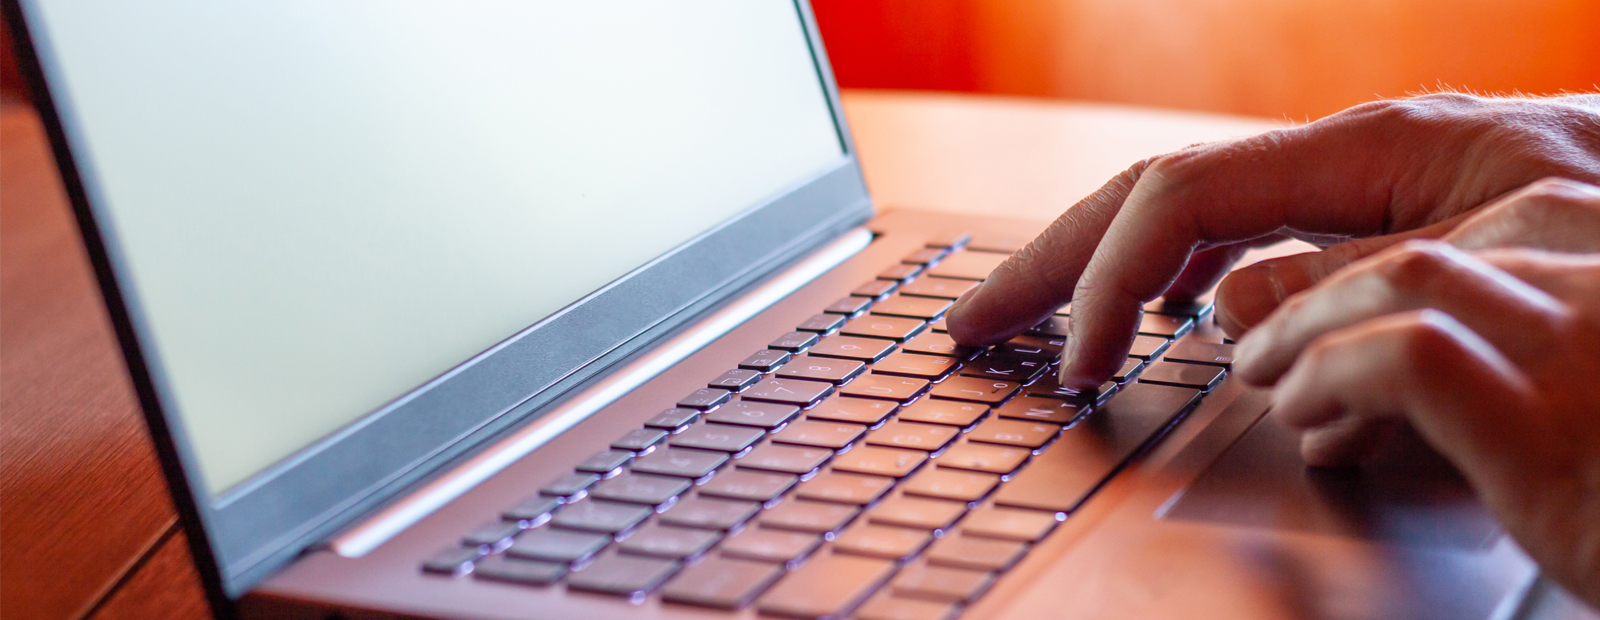 Stock image of hands typing on a laptop